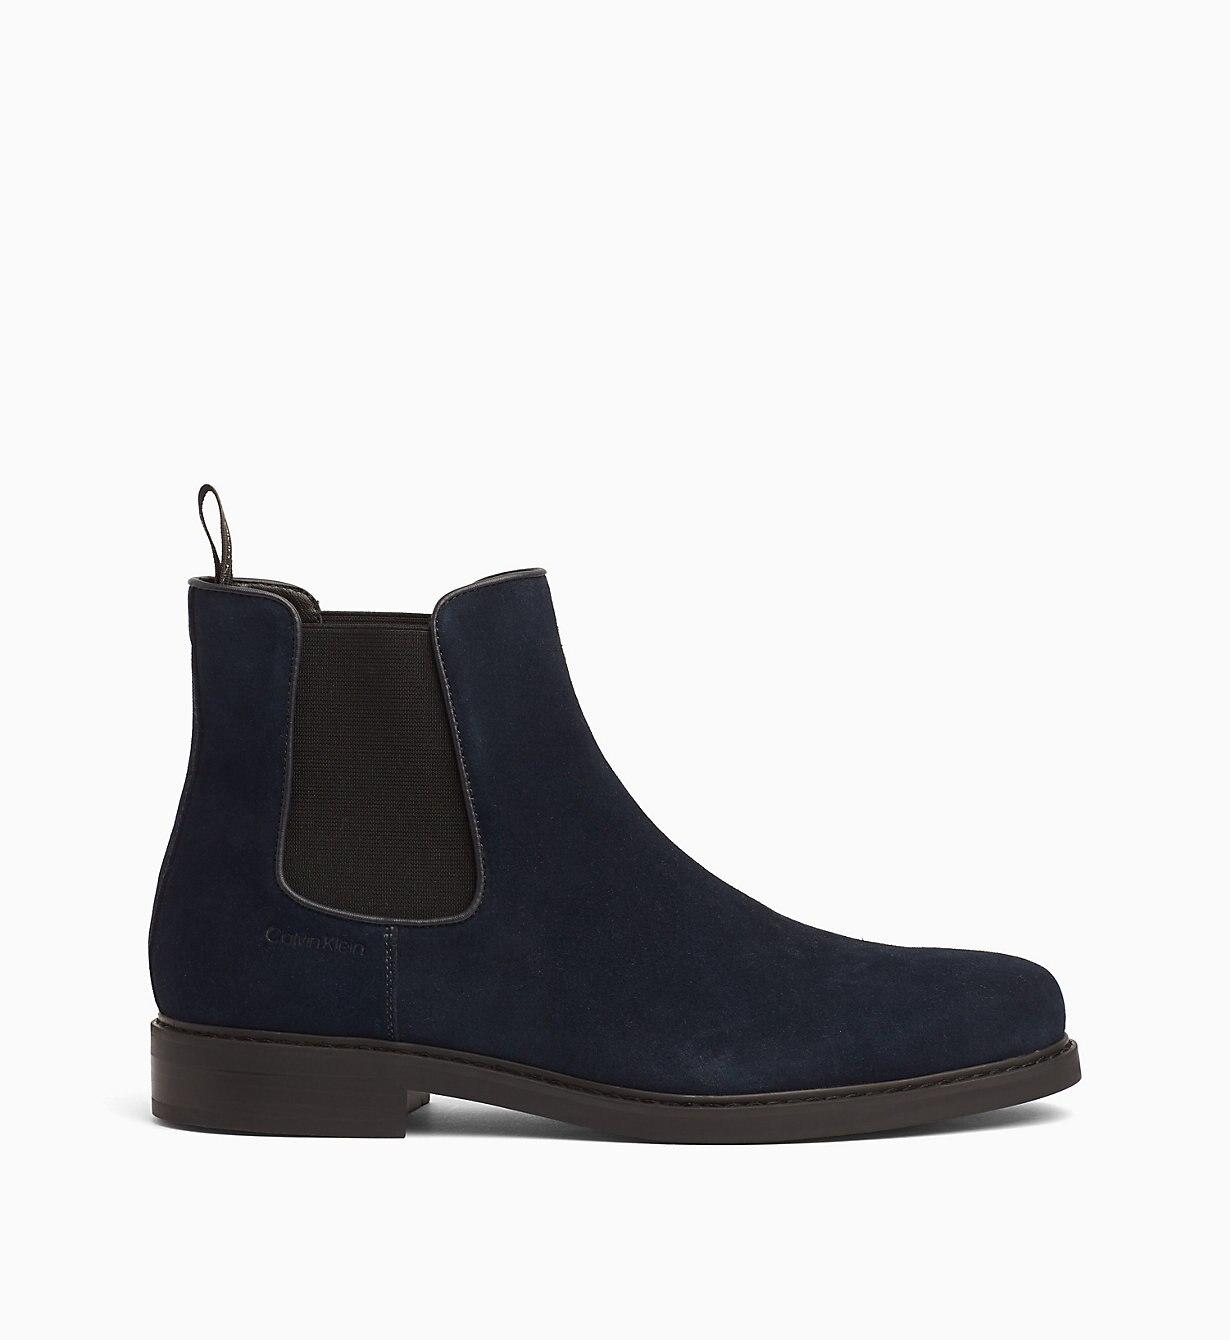 Calvin Klein Suede Chelsea Boots in Blue for Men - Lyst